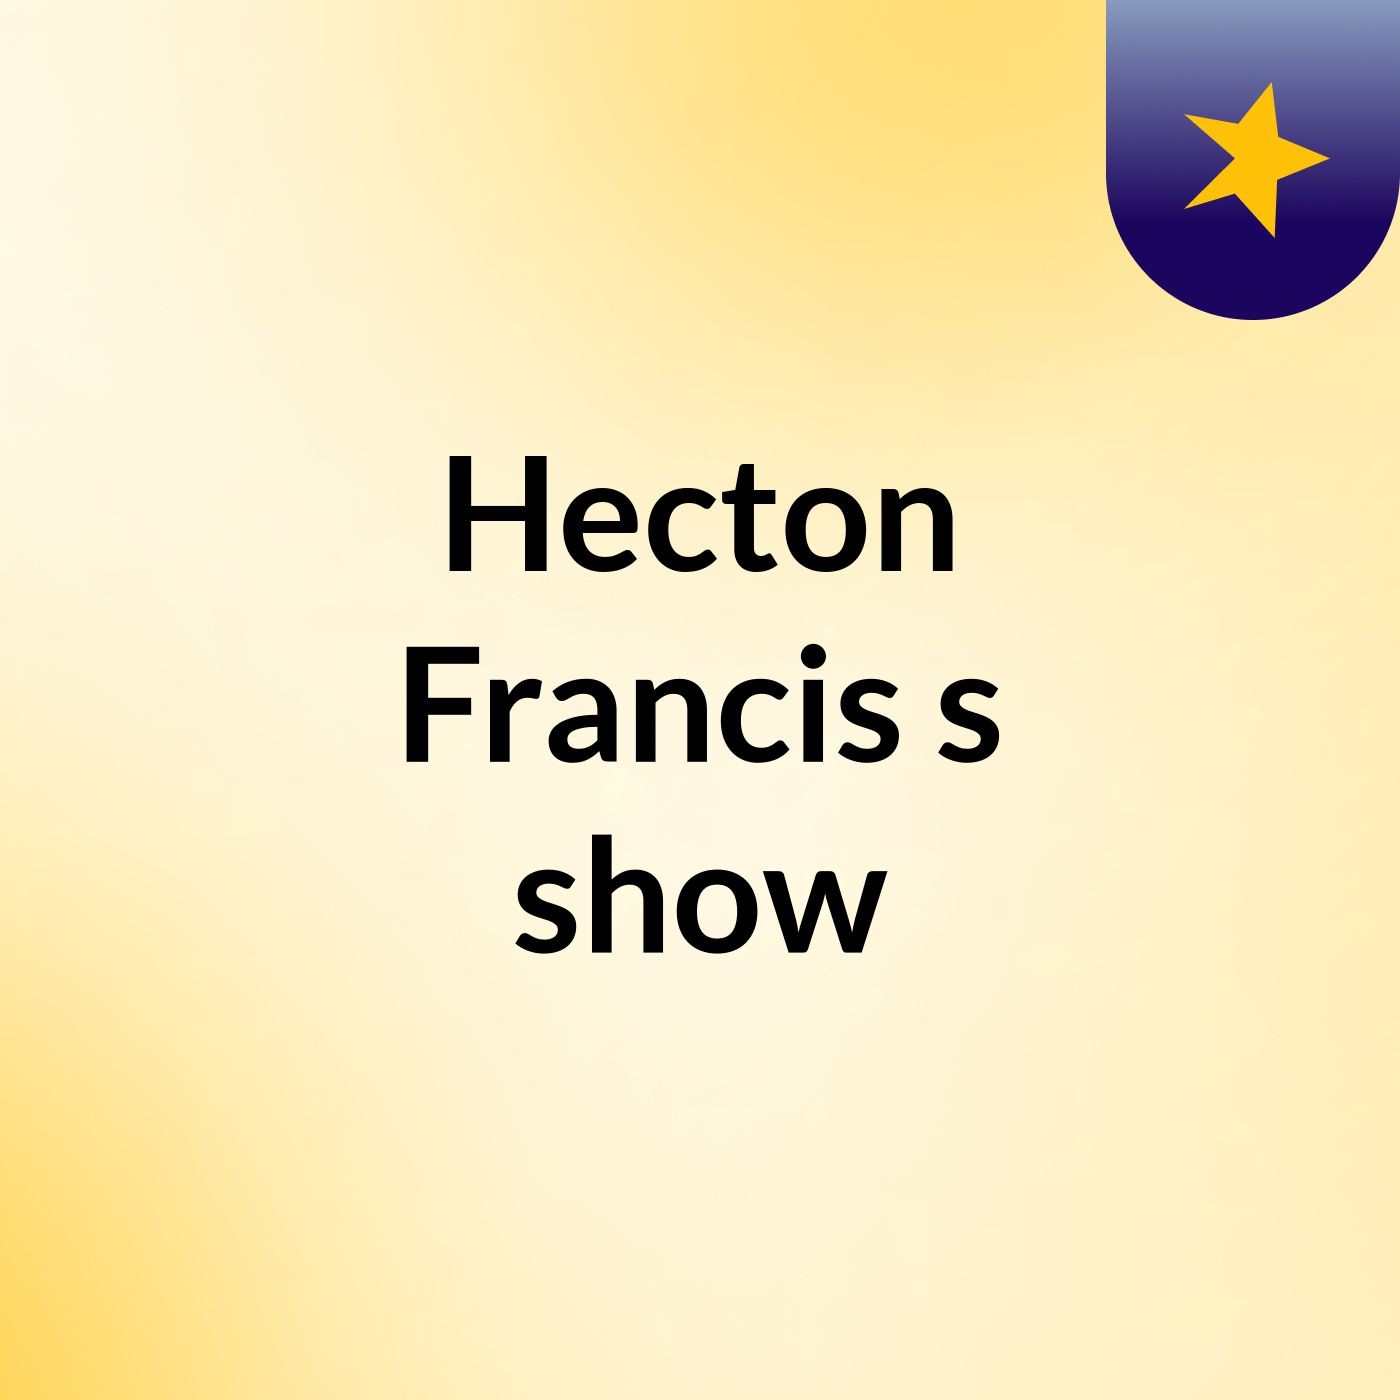 Hecton Francis's show